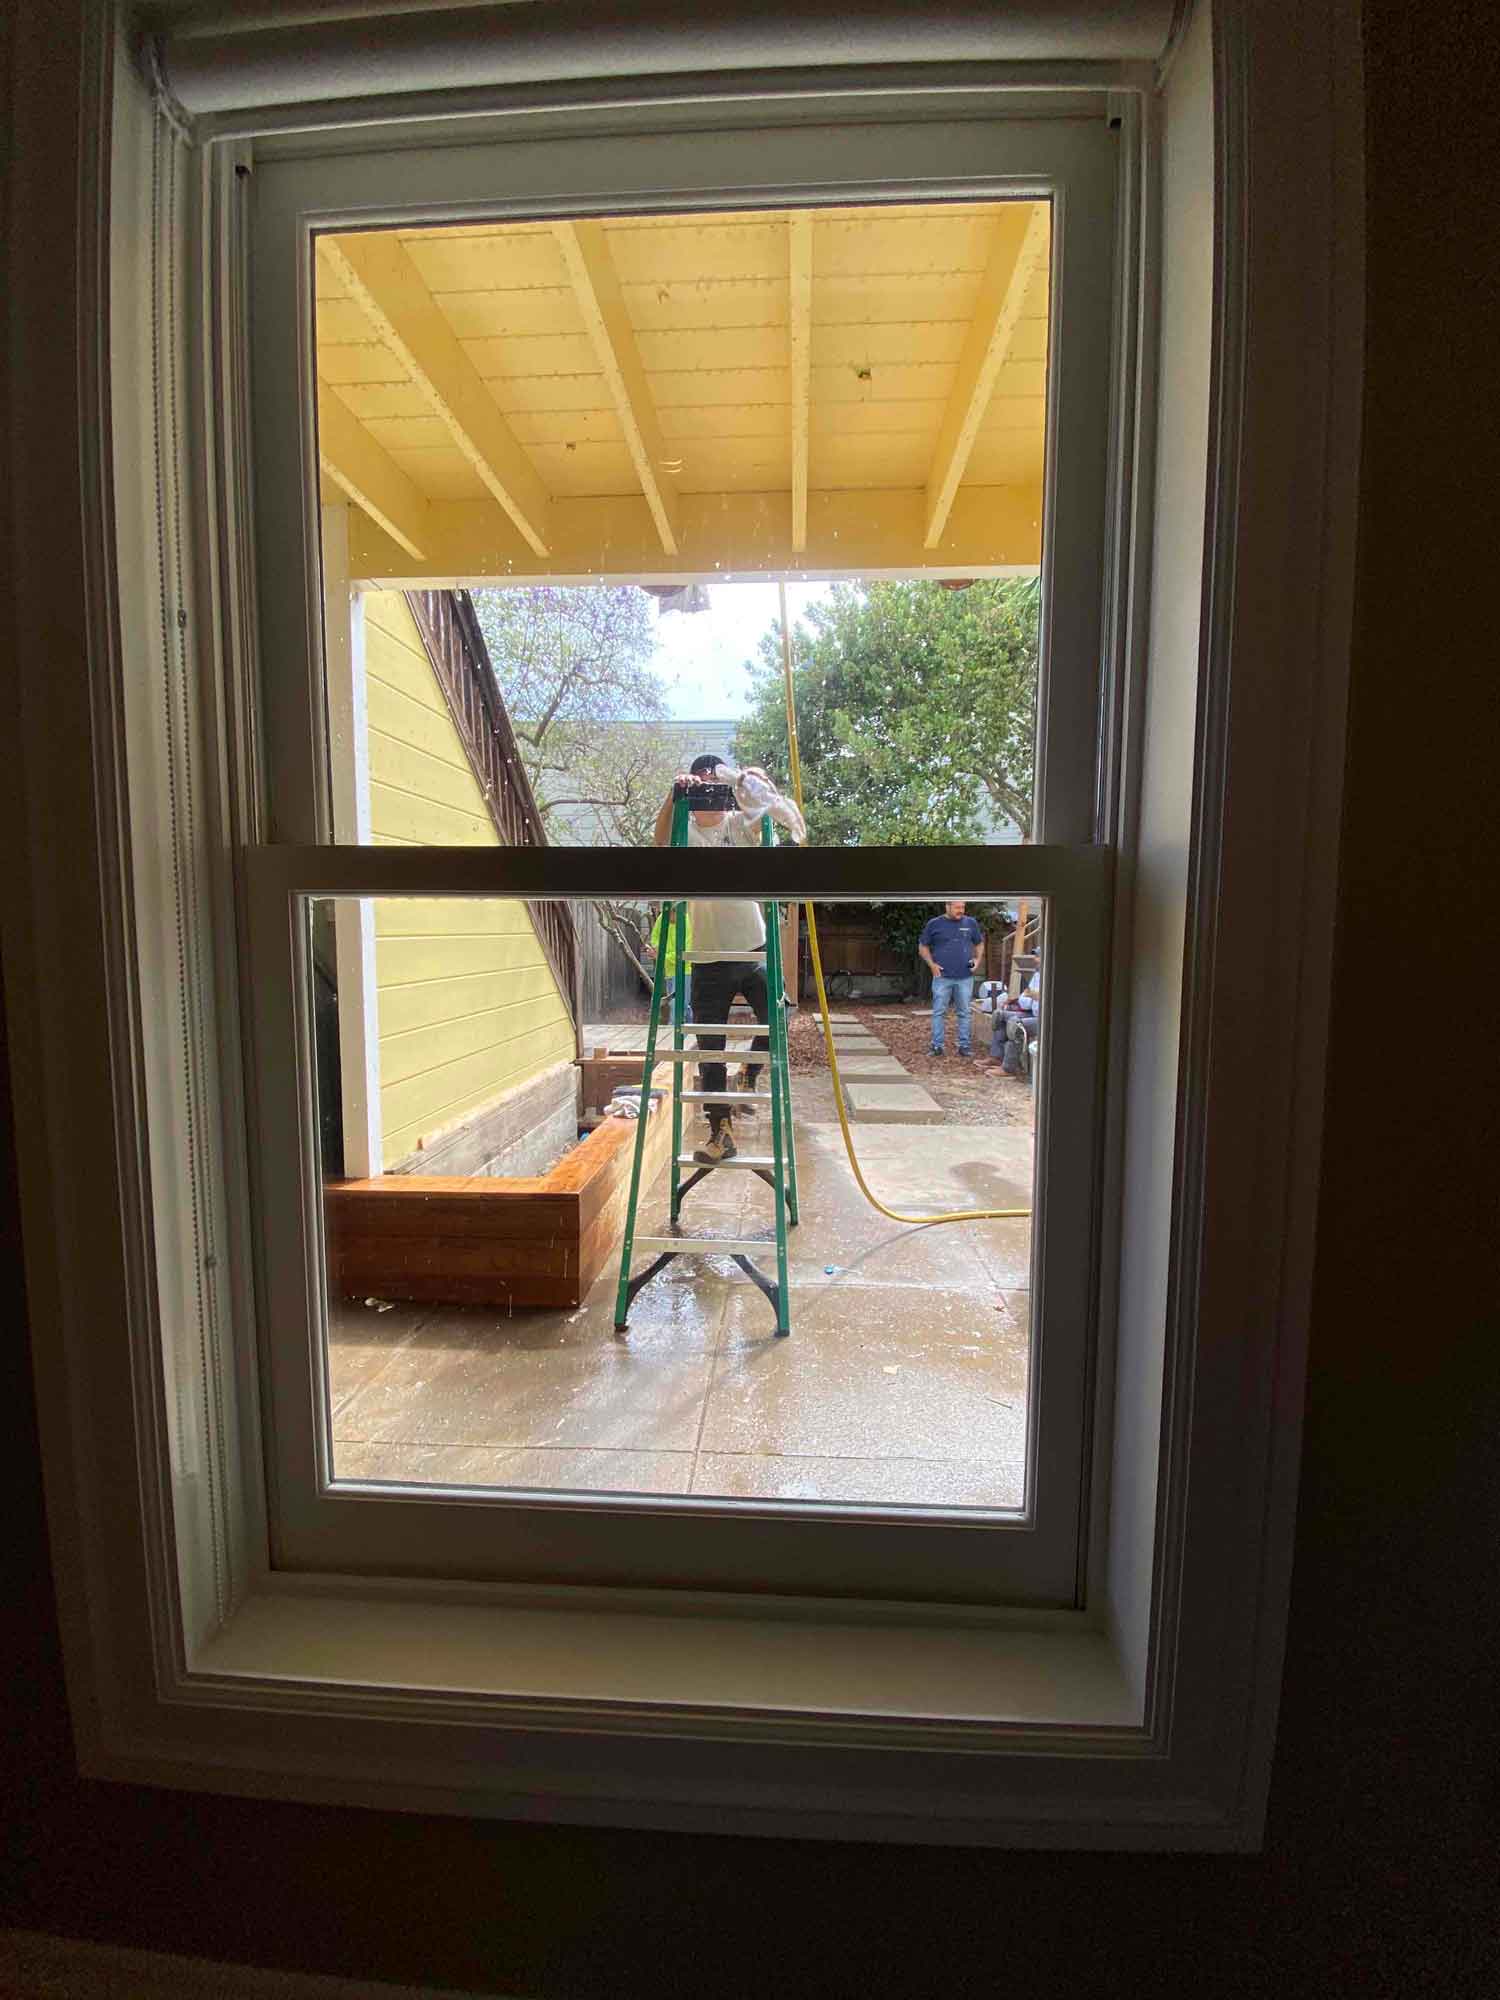 ClimatePro installed 3M Safety Window Film on the windows of this San Francisco home. Get a free estimate for your home today.